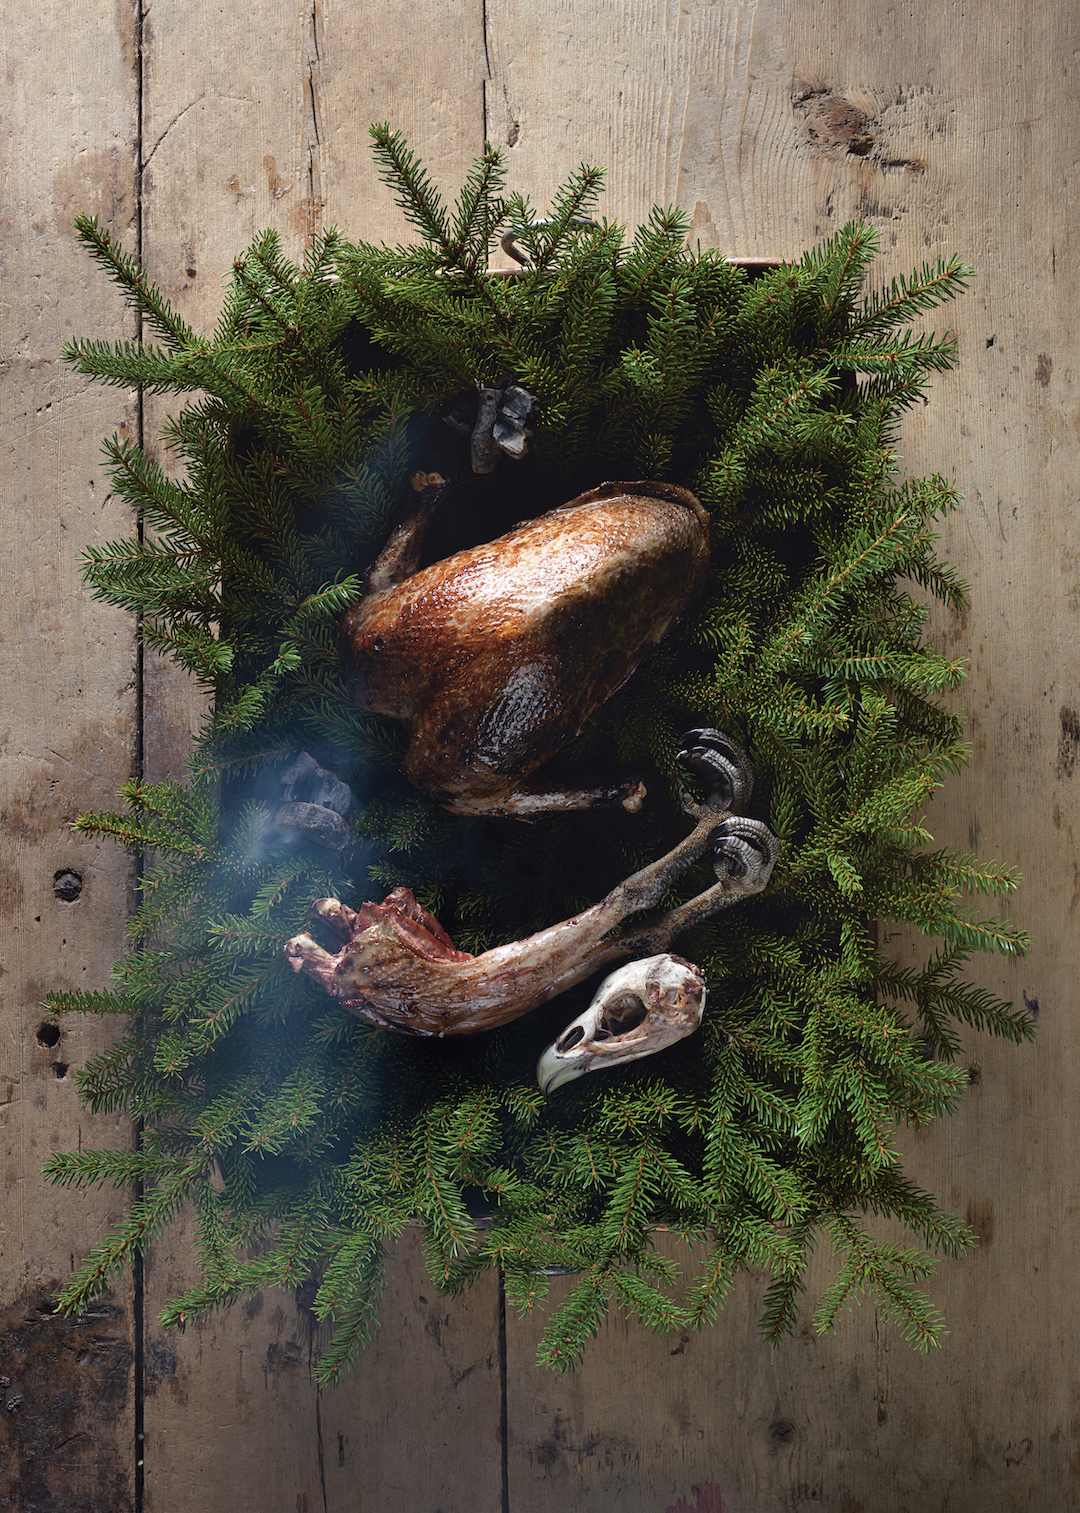 Read Magnus Nilsson’s simple tips for roasting the bird right